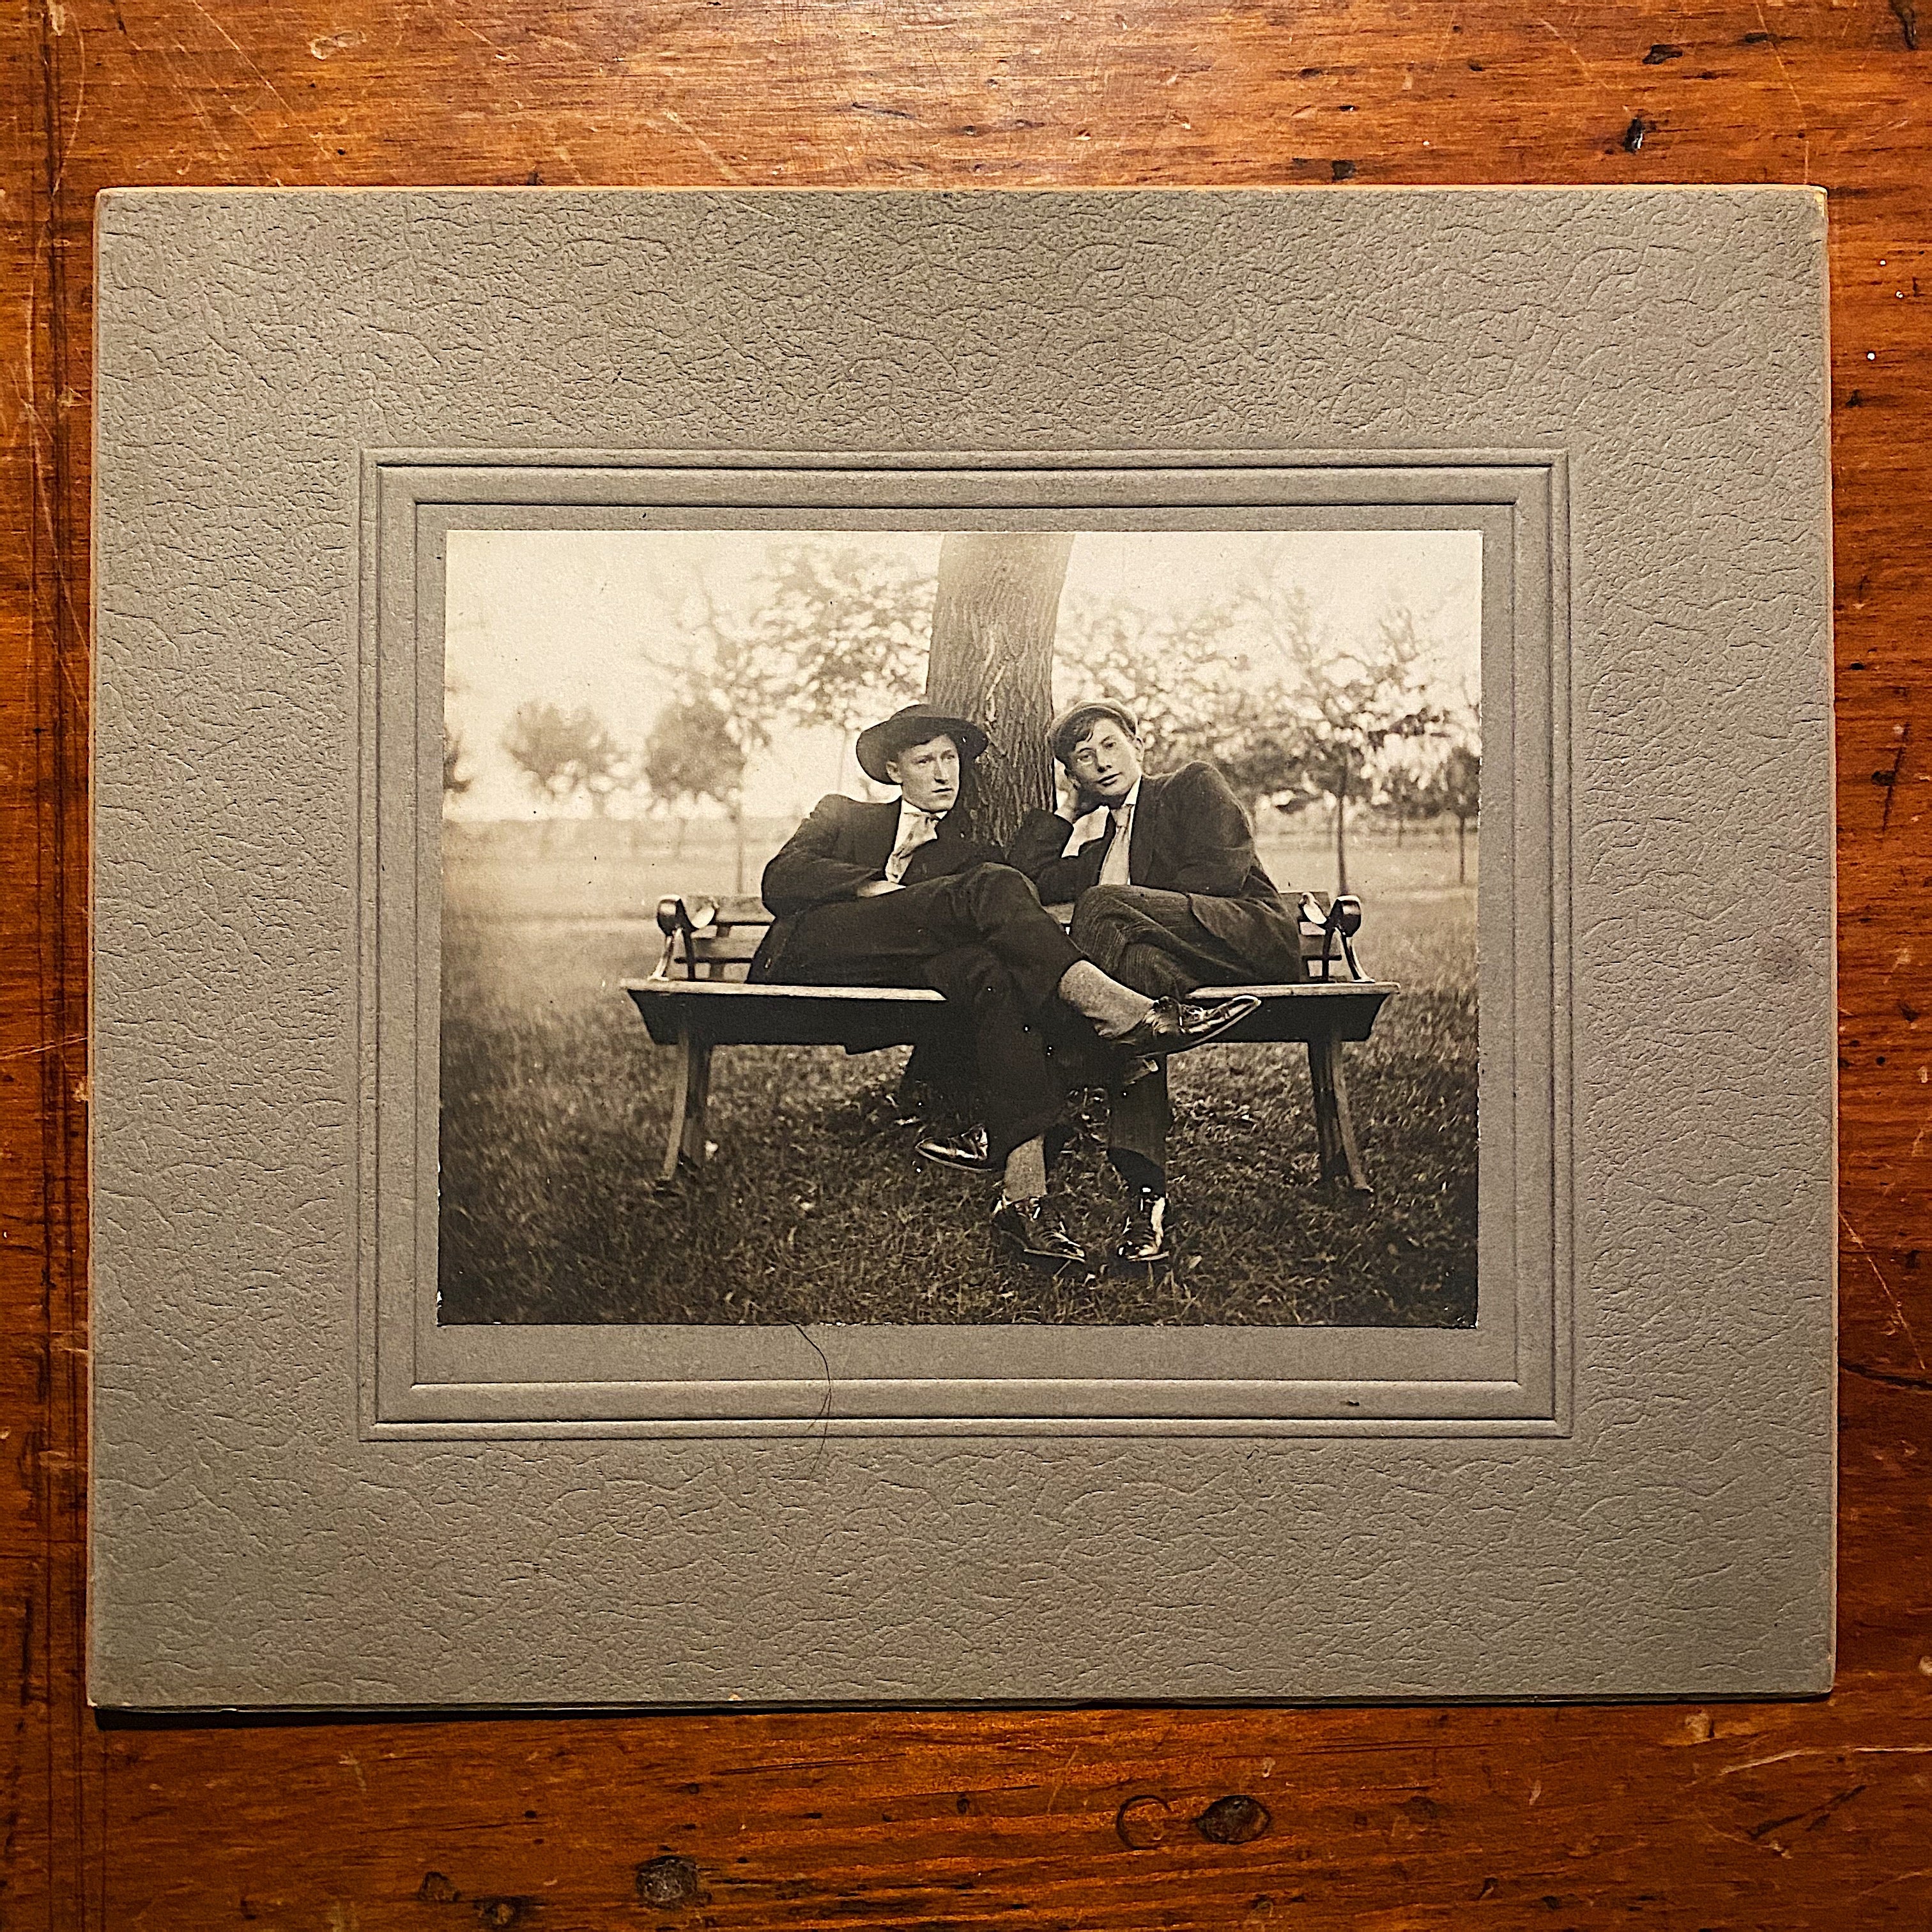 Antique Photograph of 2 Gents Lounging on a Bench - Early 1900s - Rare Unusual Scene - Oscar Wilde - Silver Gelatin Print  with Backing